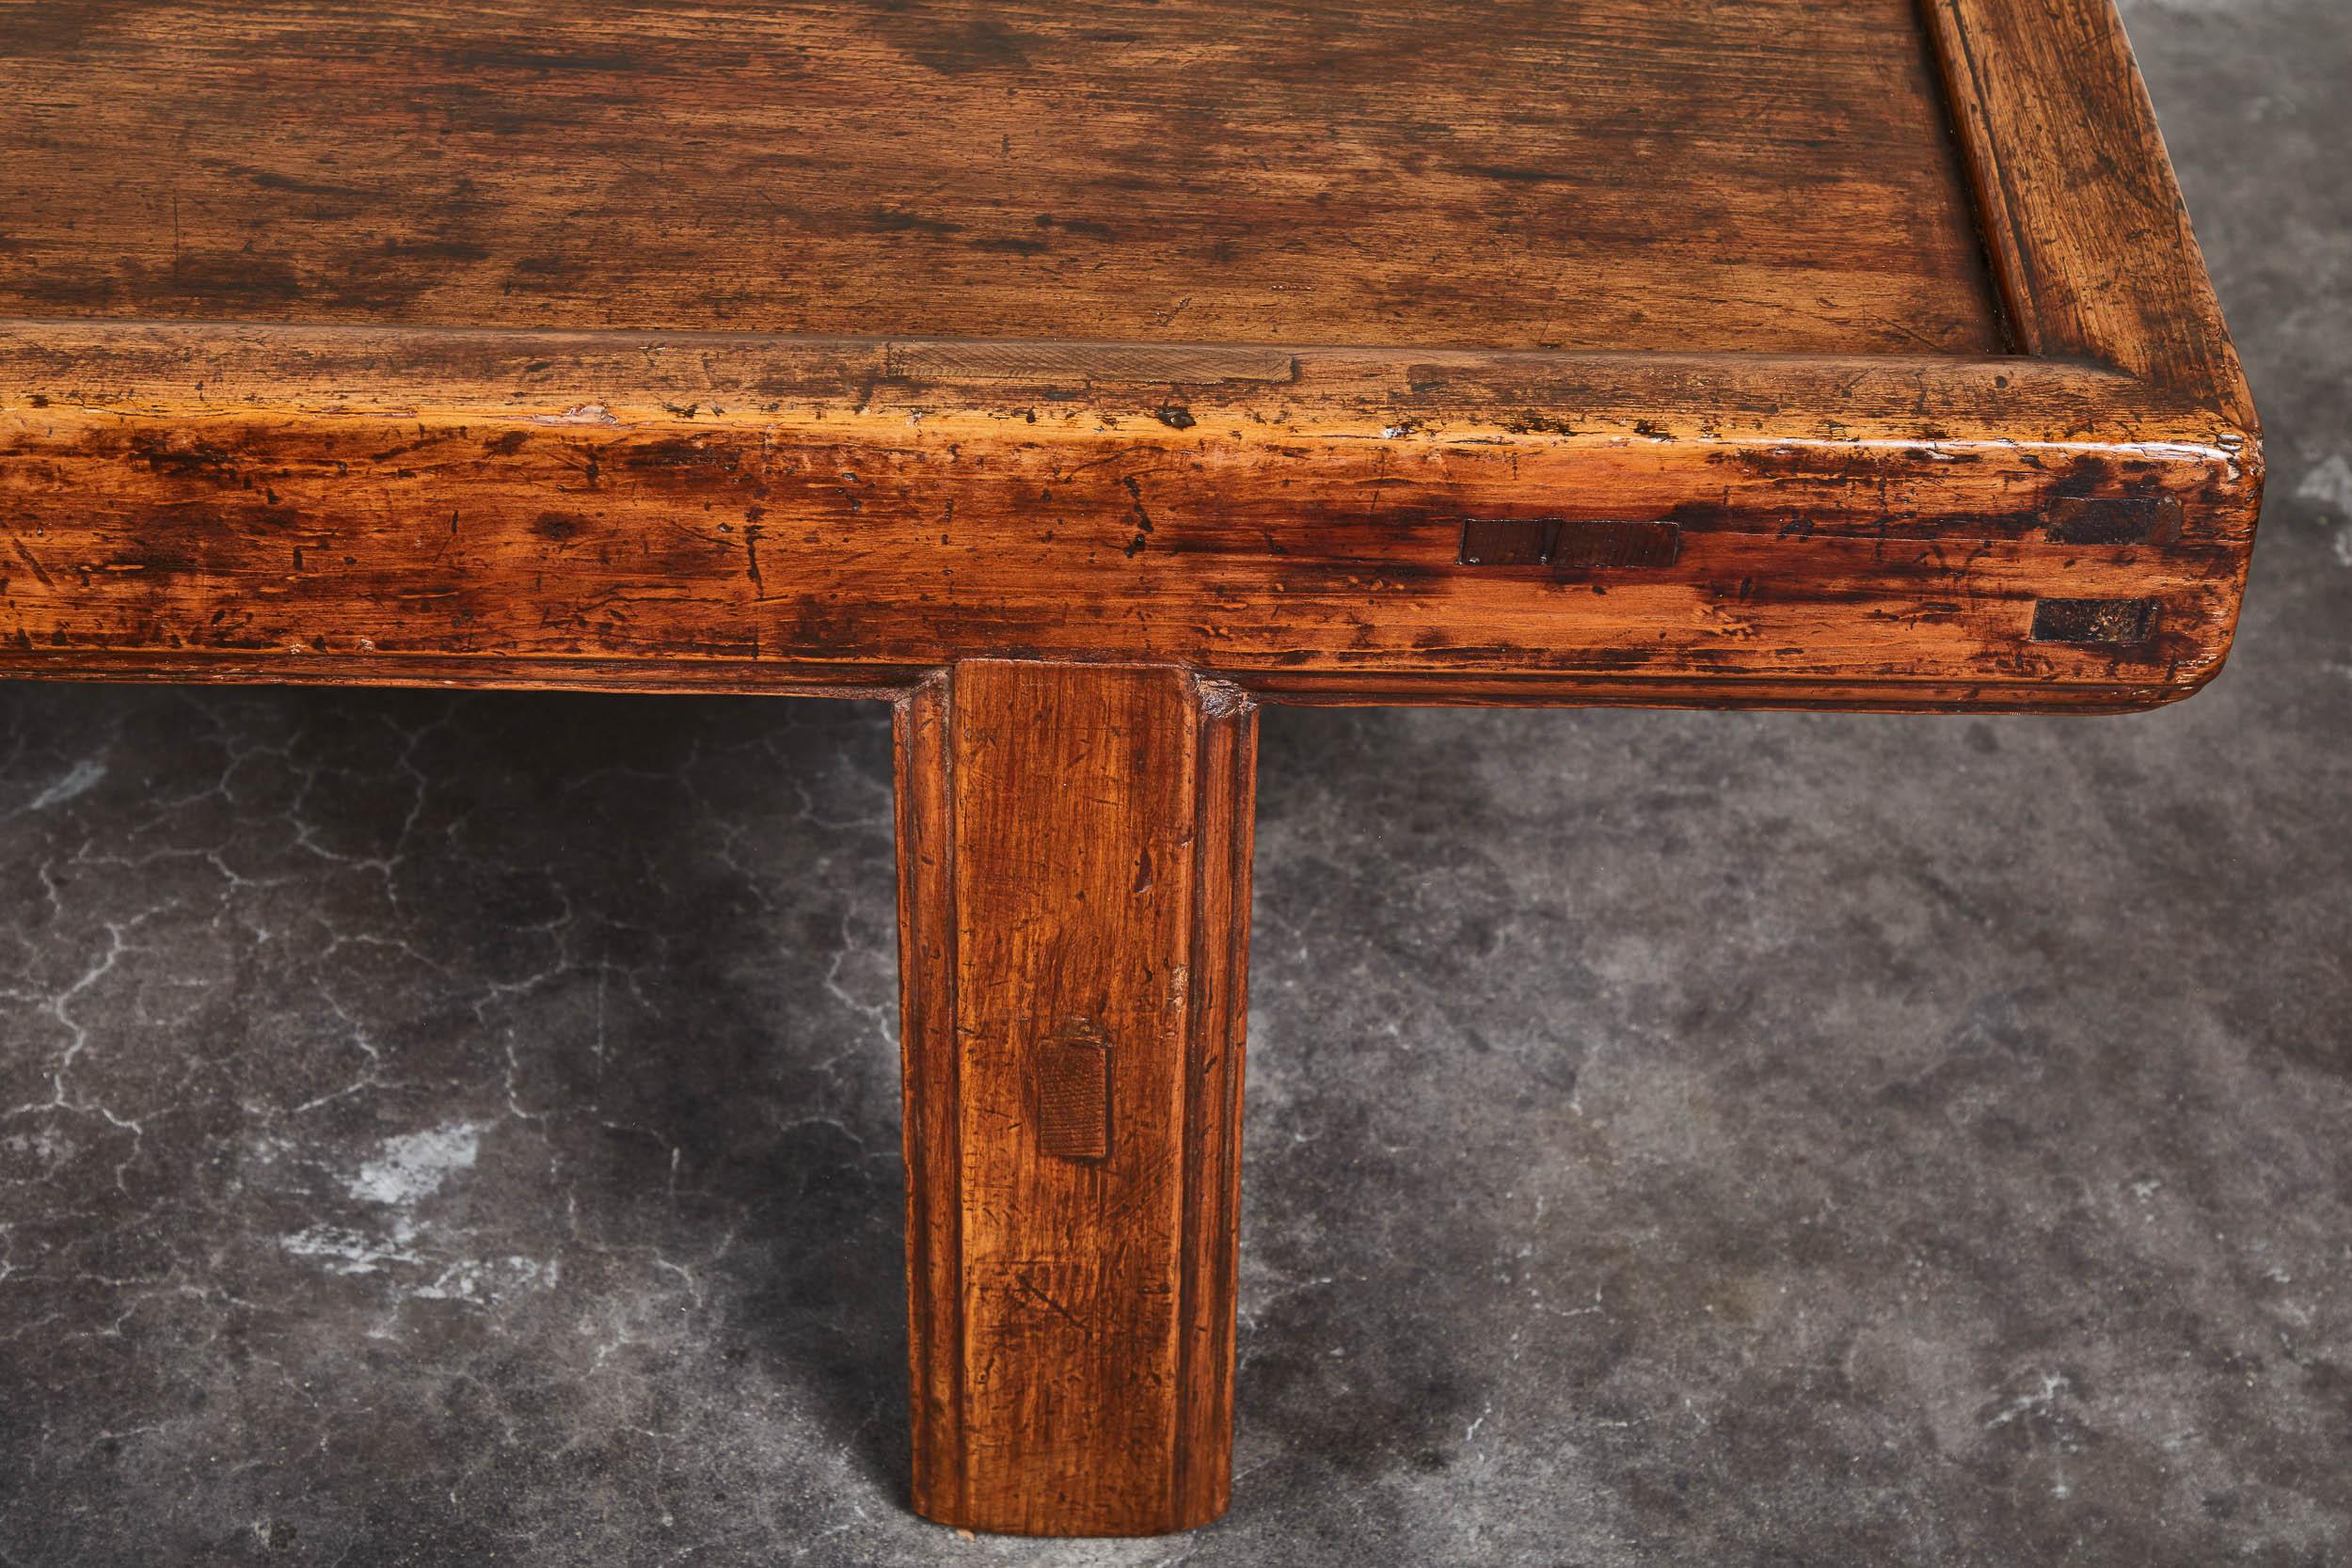 A simple 19th century Chinese low table, with an overall rustic patina. Clean, simple stretchers on four straight legs. Minor cracks and nicks on bottom corners, consistent with age. Top is even in patina and surface. Would make a great textural